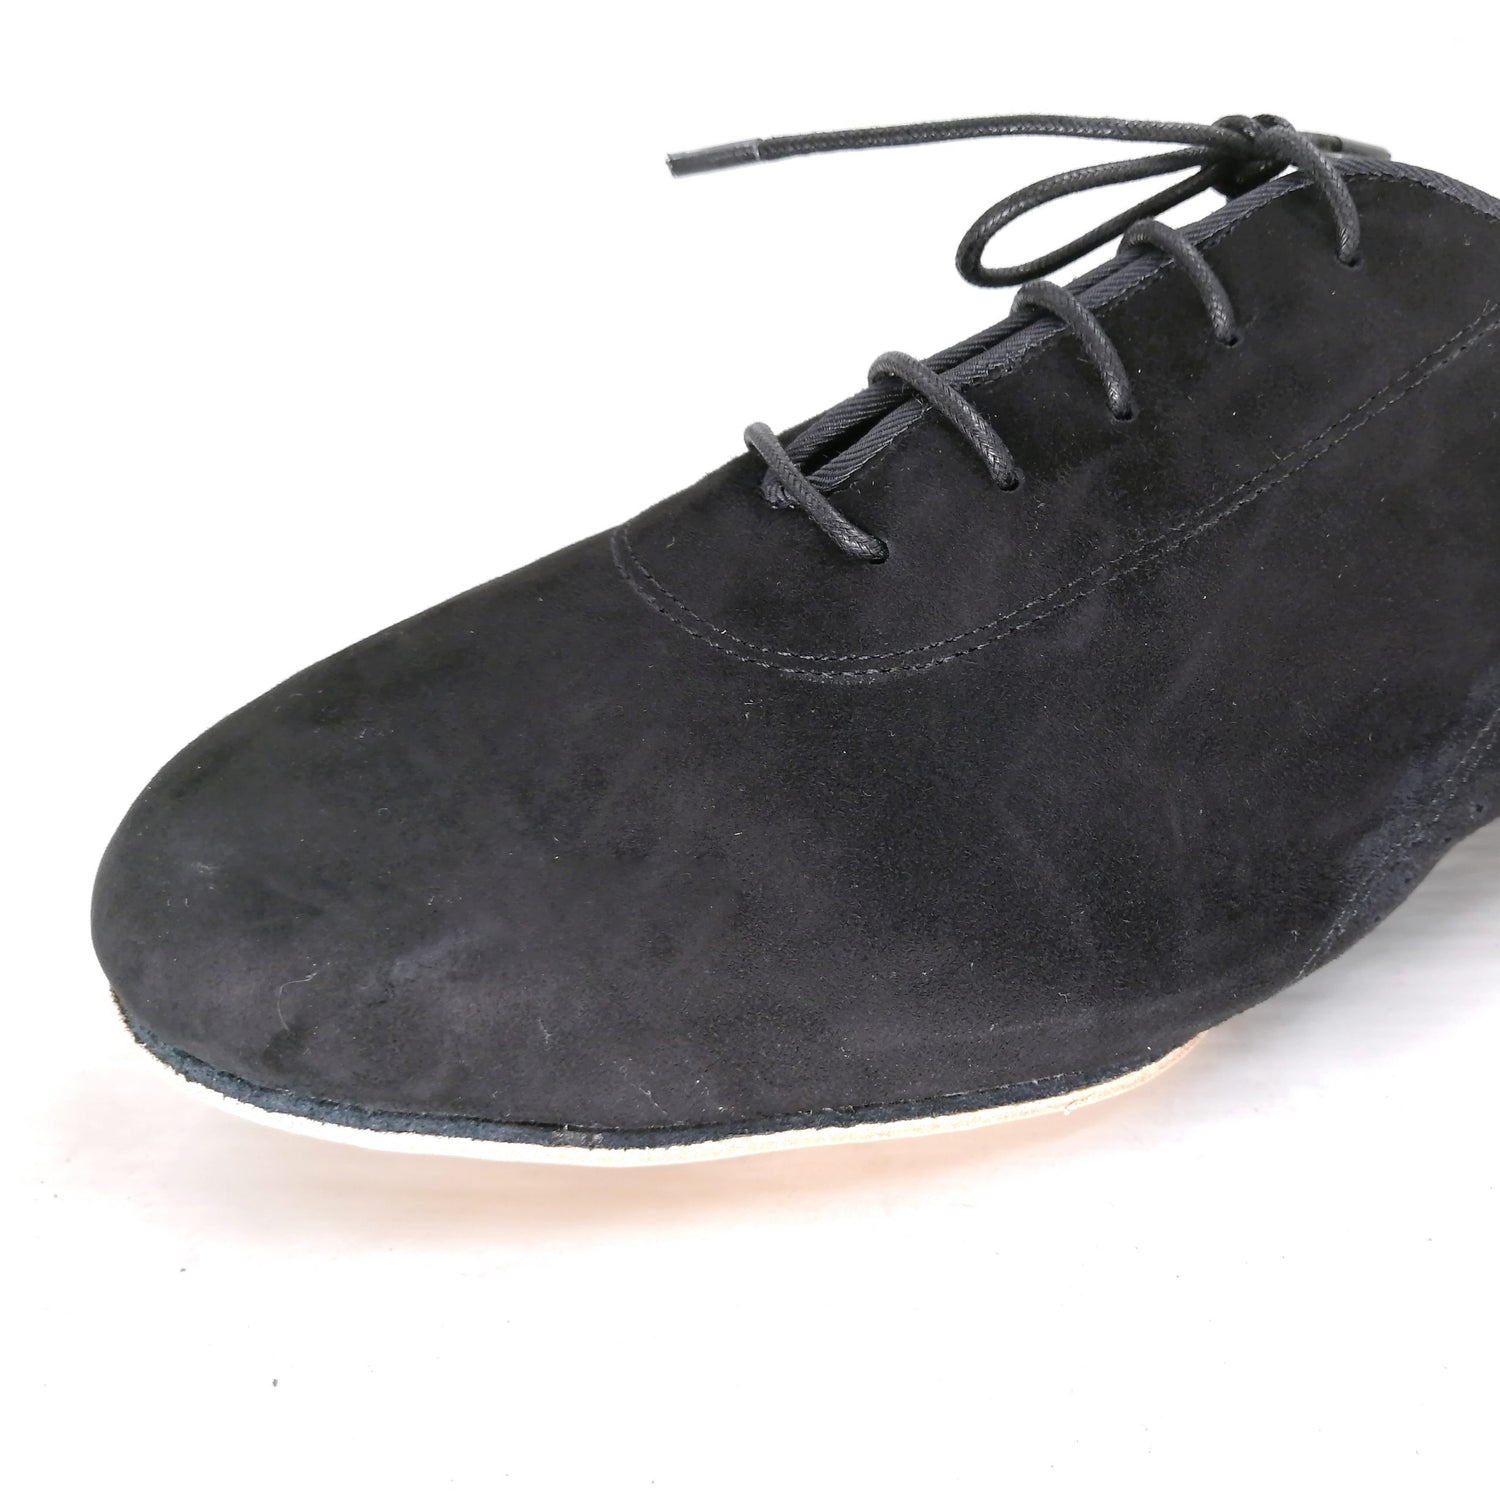 Pro Dancer Men's Tango Shoes with 1 inch Heel, Split Sole and Leather Lace-ups5